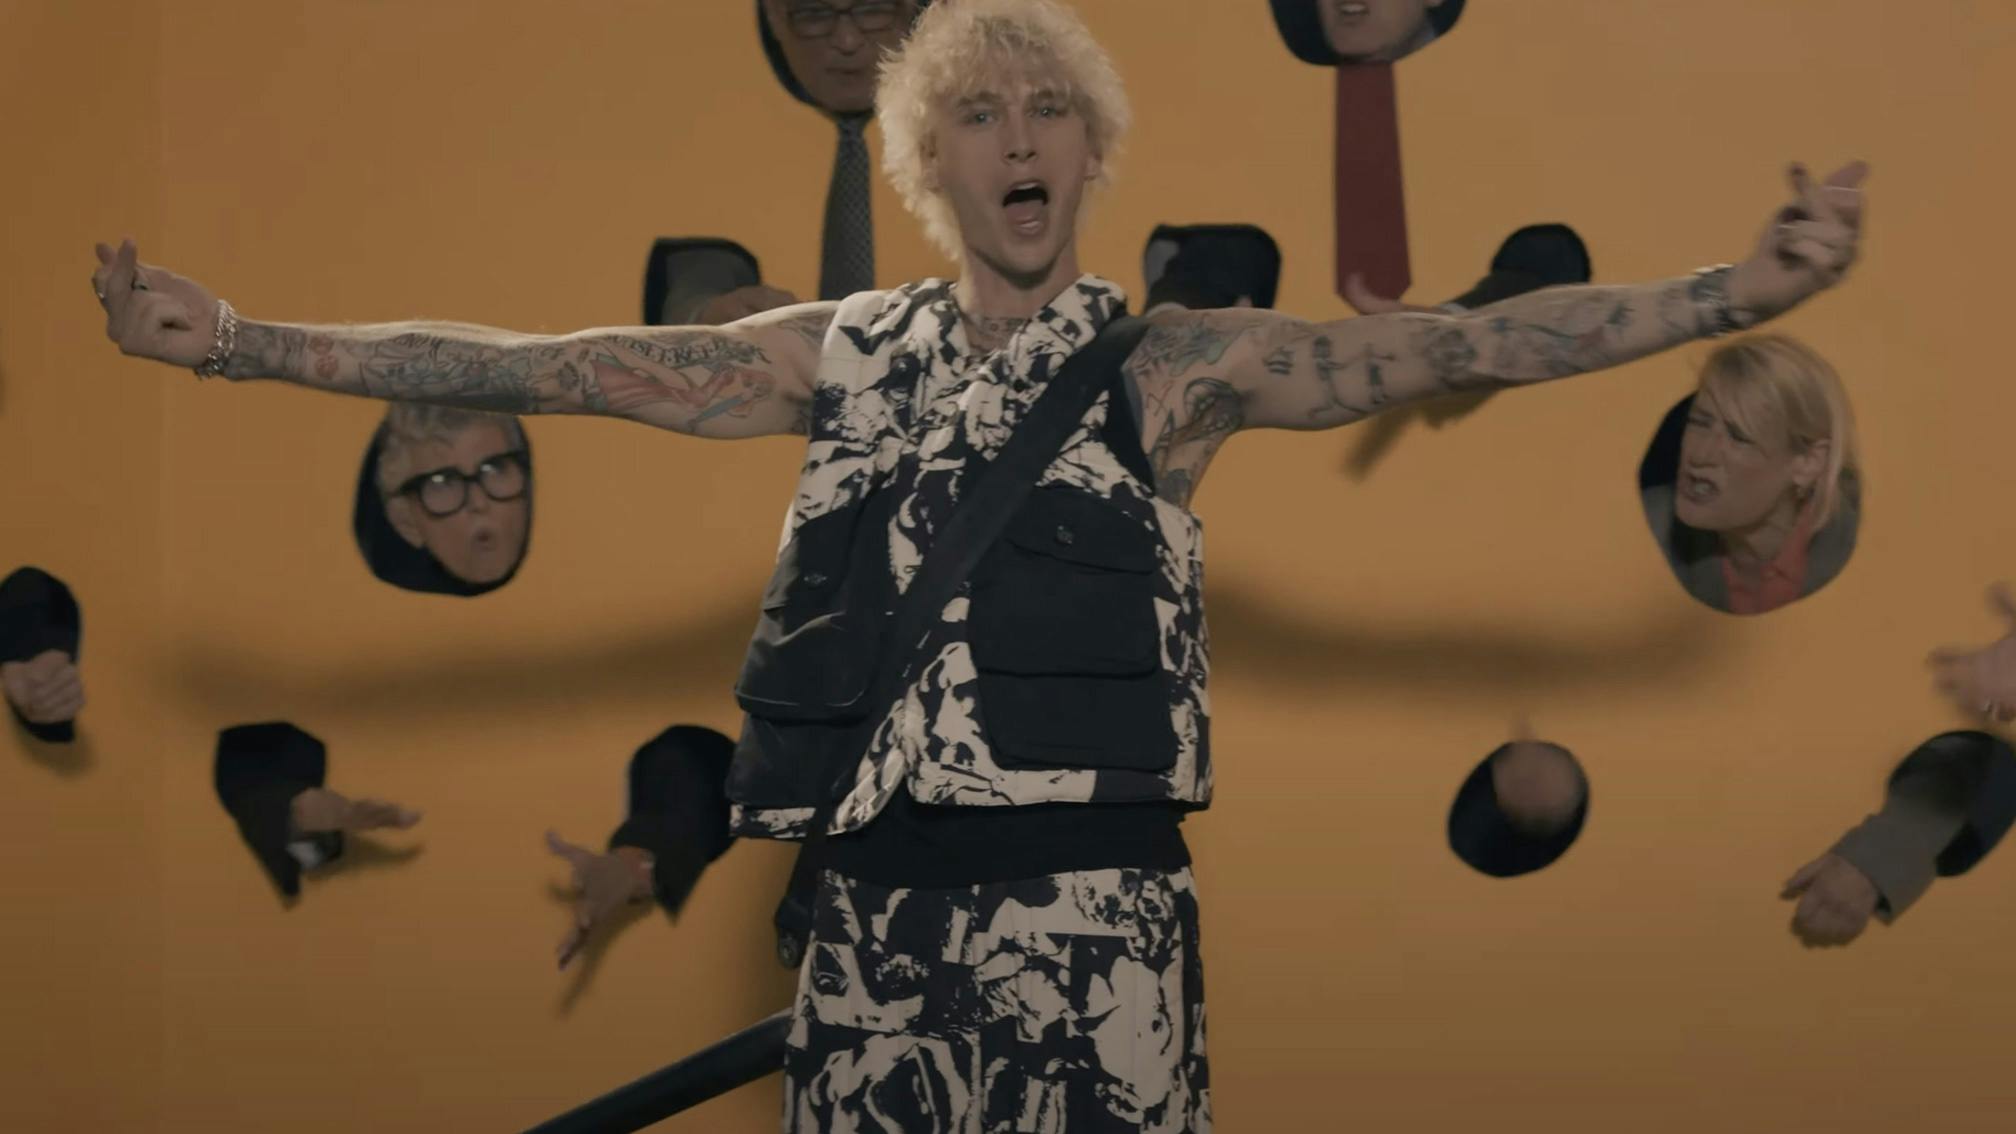 MGK's Downfalls High musical gets over 16 million views on opening weekend